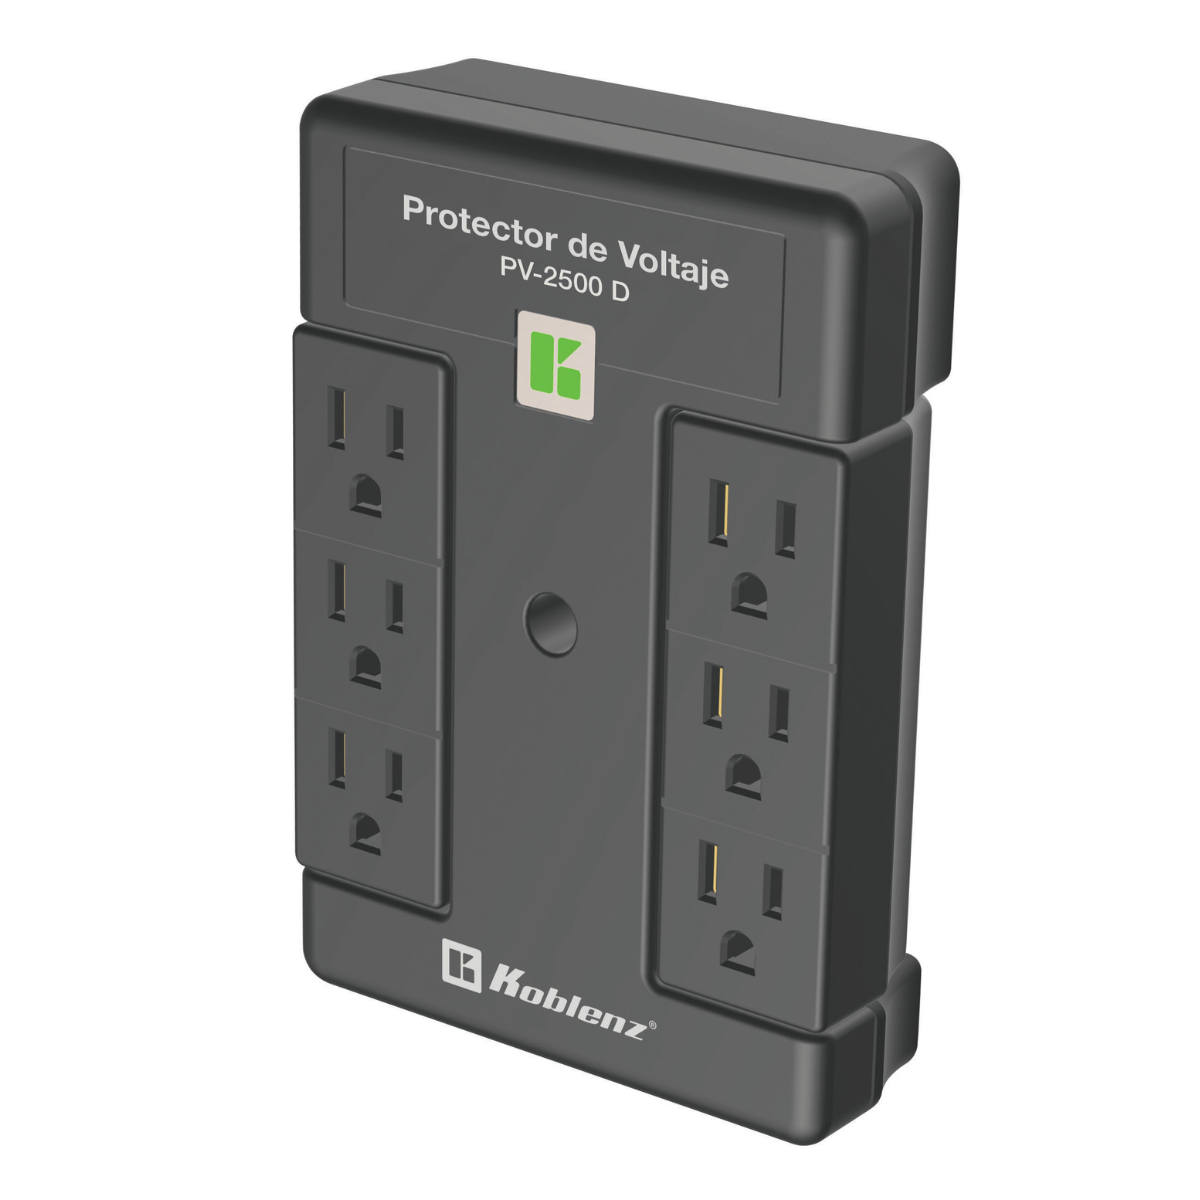 Surge Protector PV-2500 D